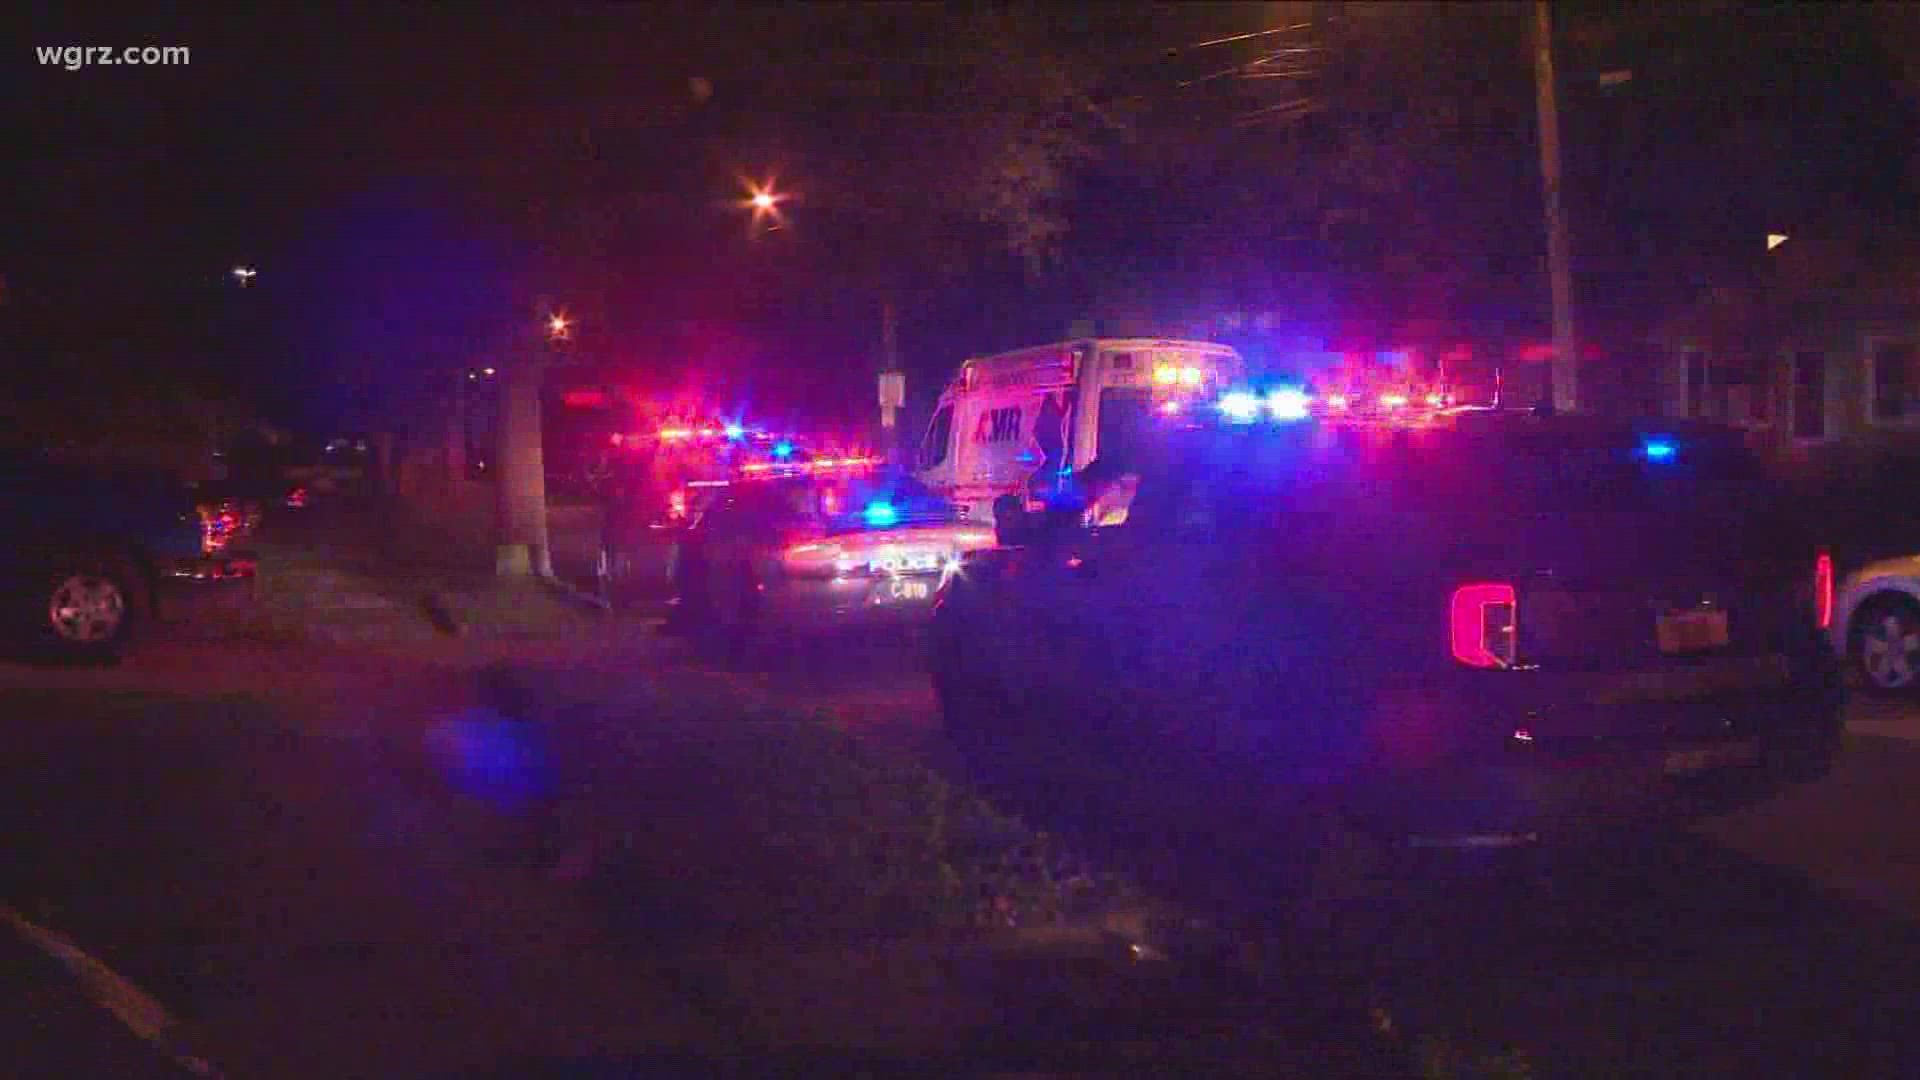 Buffalo police are investigating an overnight shooting incident.